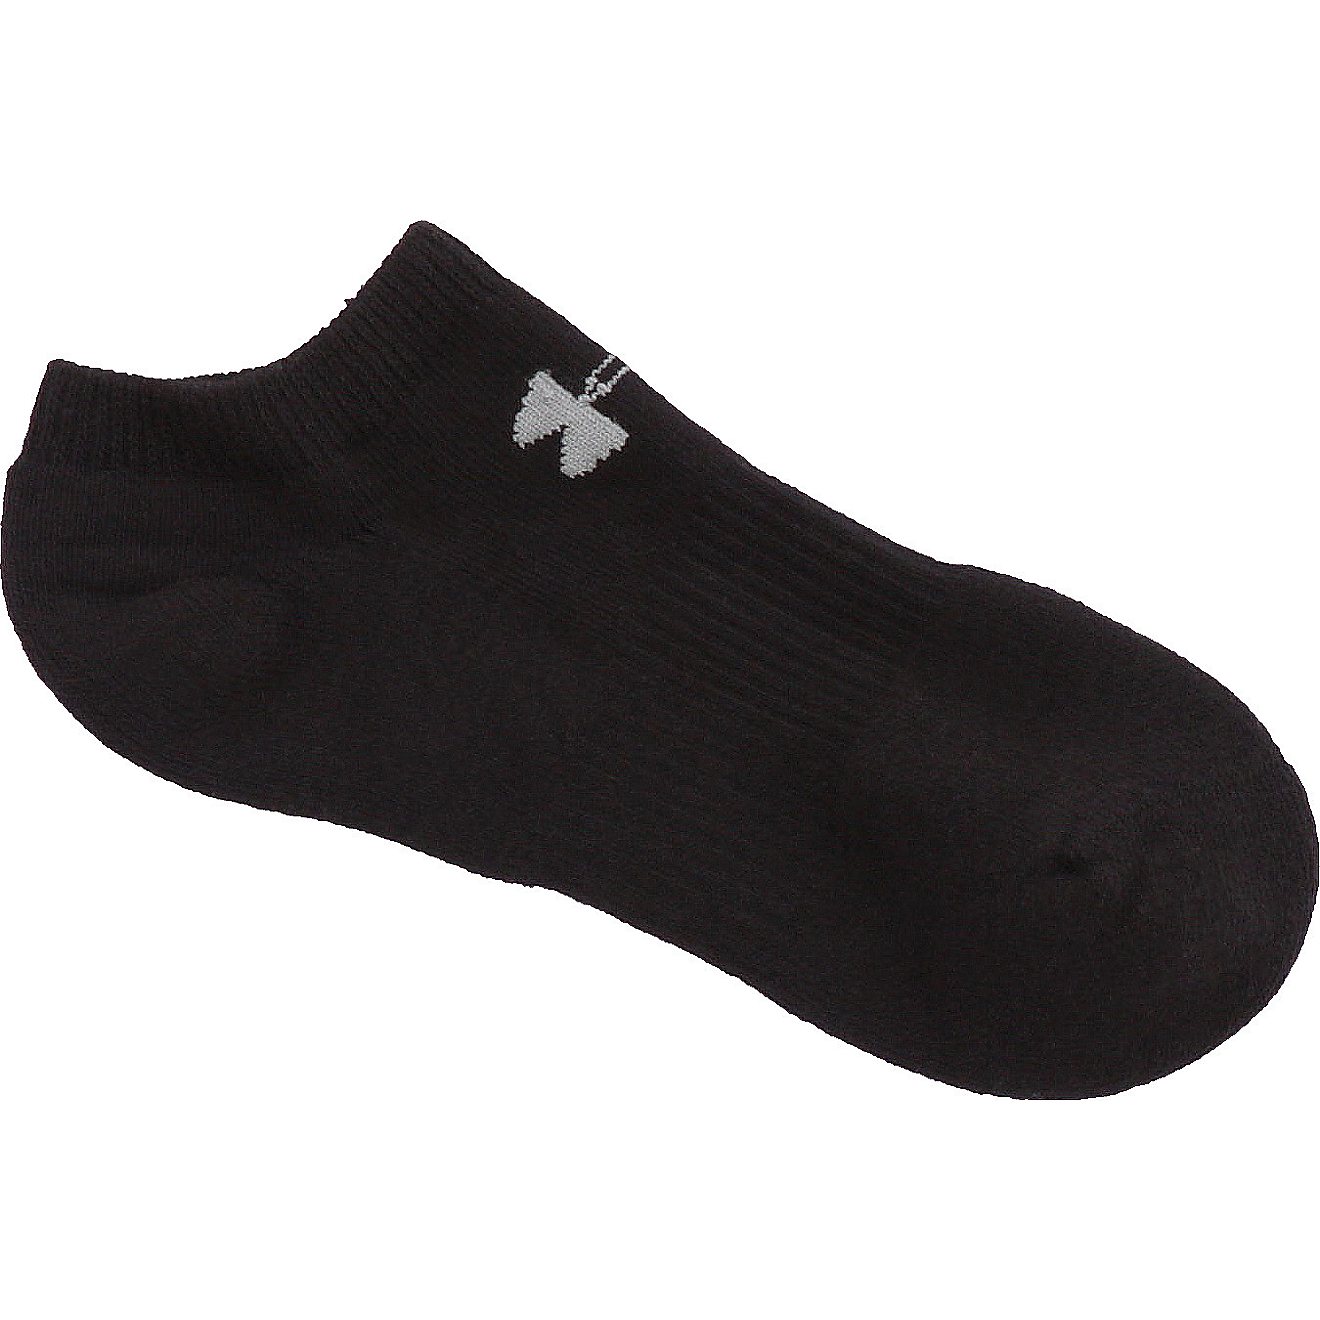 Under Armour UA Charged Cotton 2.0 No Show 6-Pack MD Black